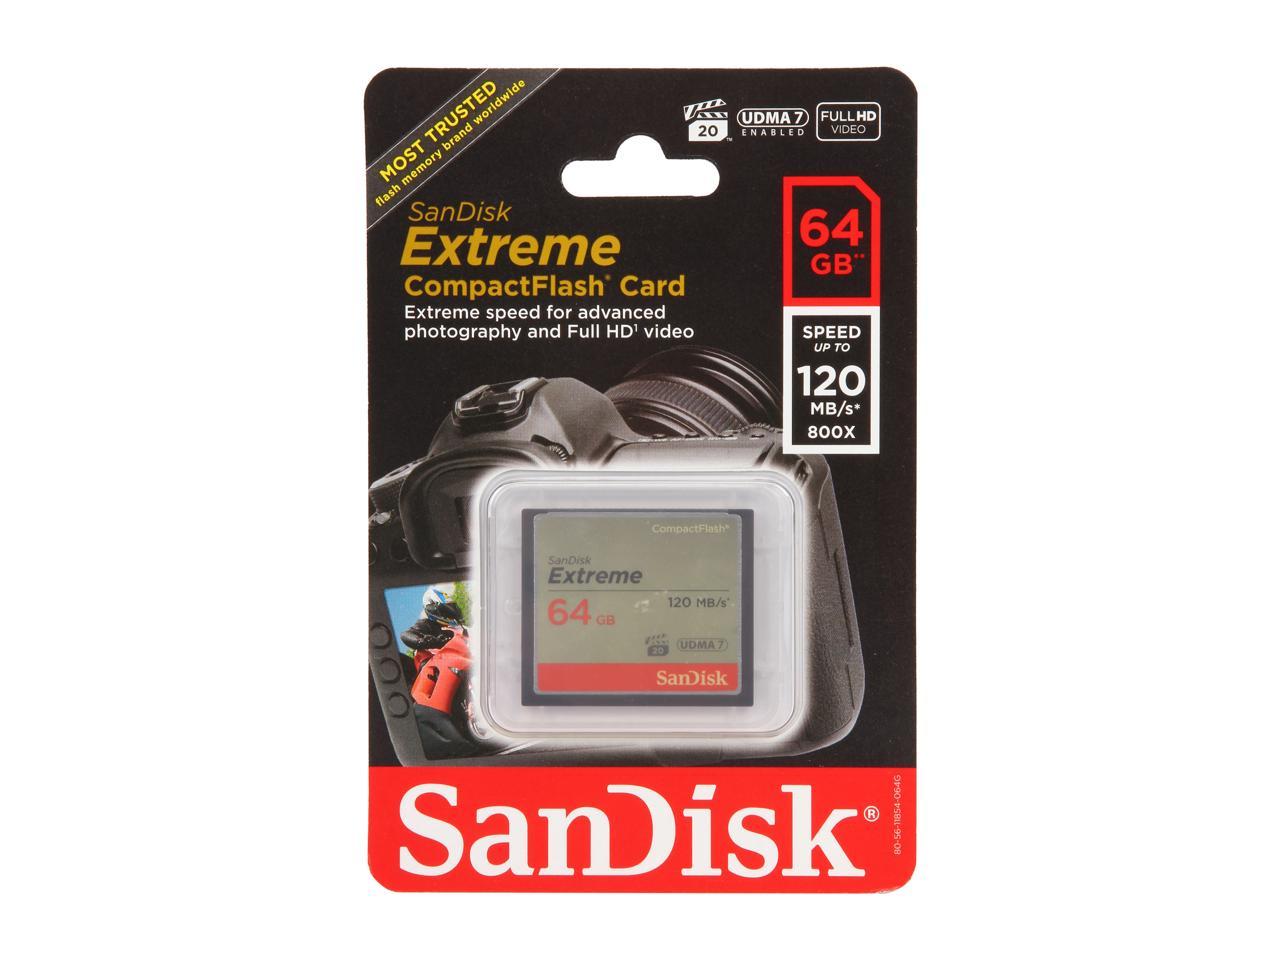 SanDisk 64GB Compact Flash (CF) Memory Card Extreme 400x UDMA Model SDCFXS-064G-A46